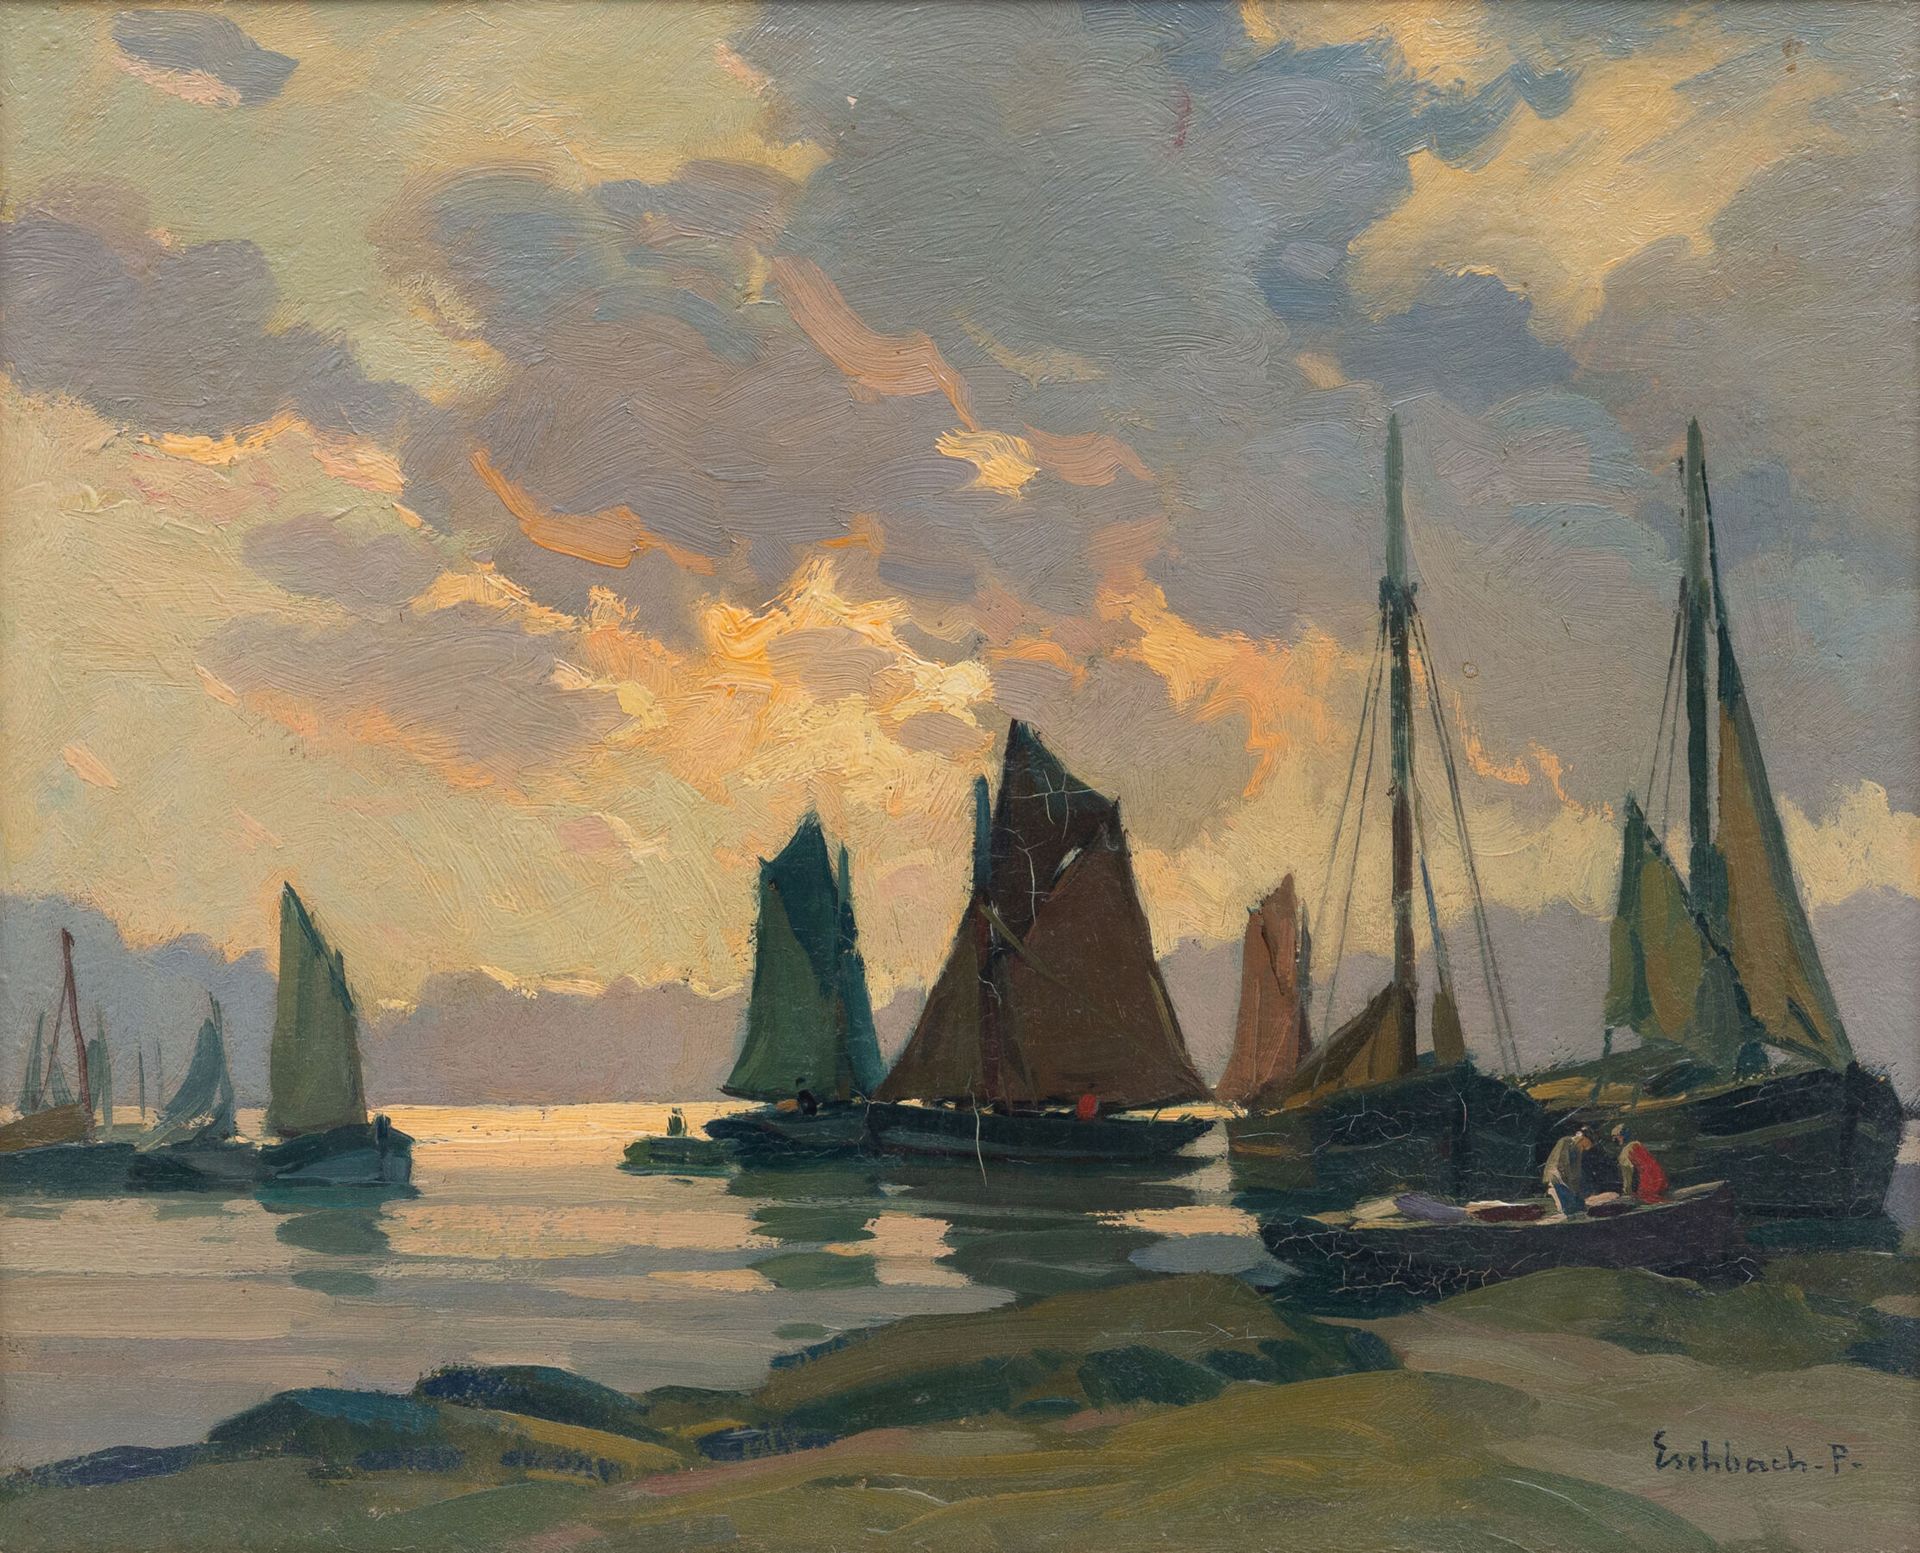 Null Paul André Jean ESCHBACH (1881-1961).
Normandy, the sailboats, morning effe&hellip;